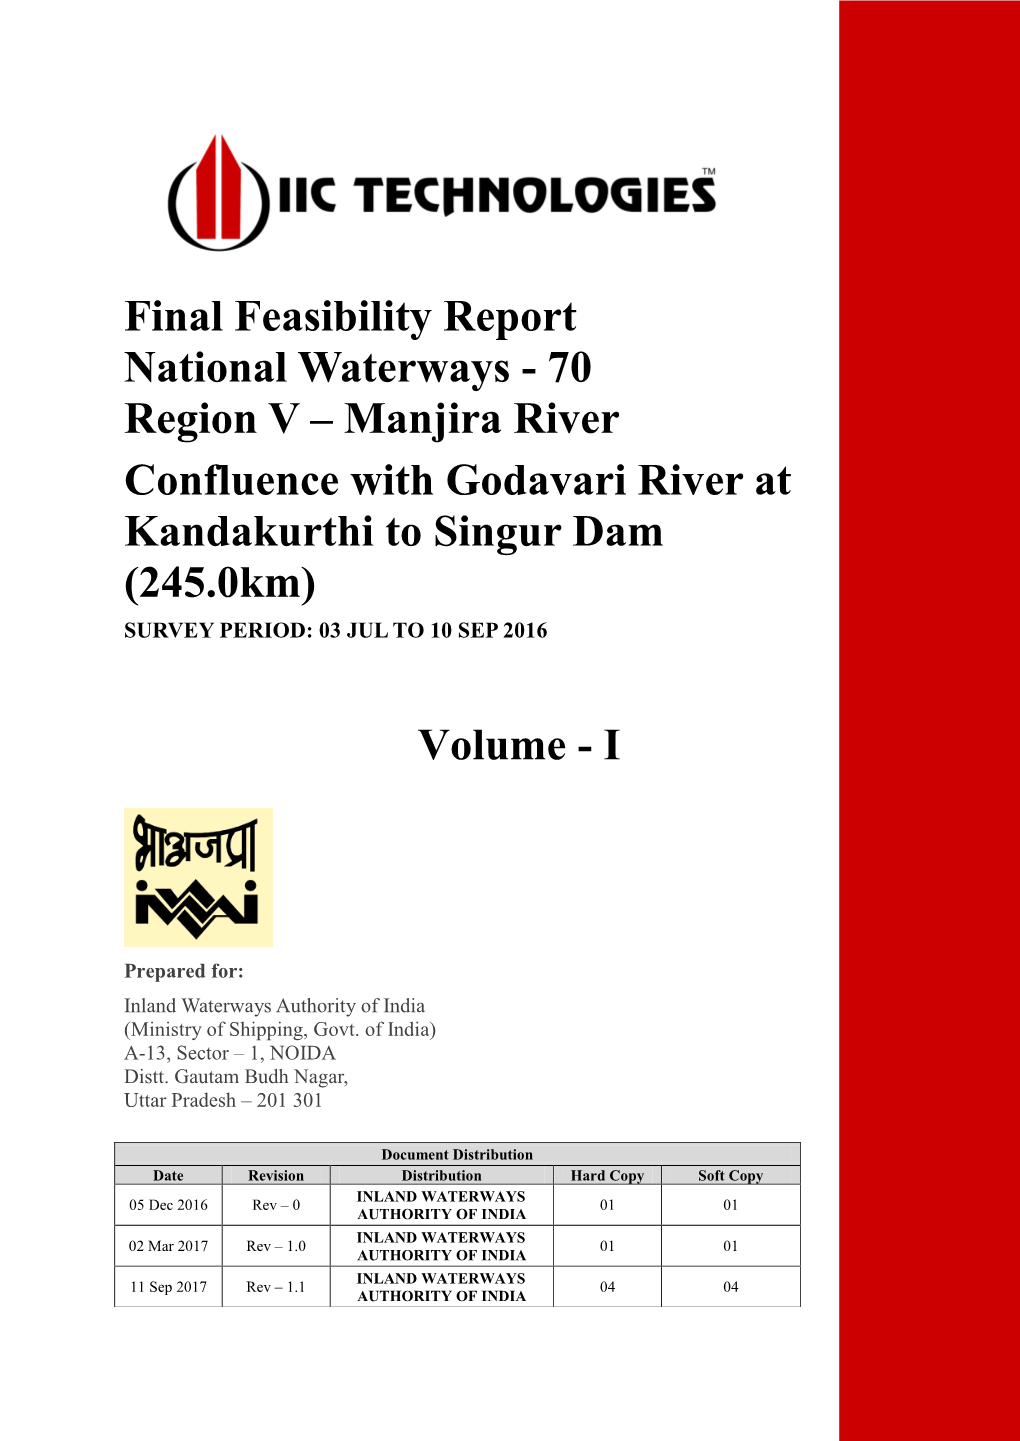 Final Feasibility Report National Waterways